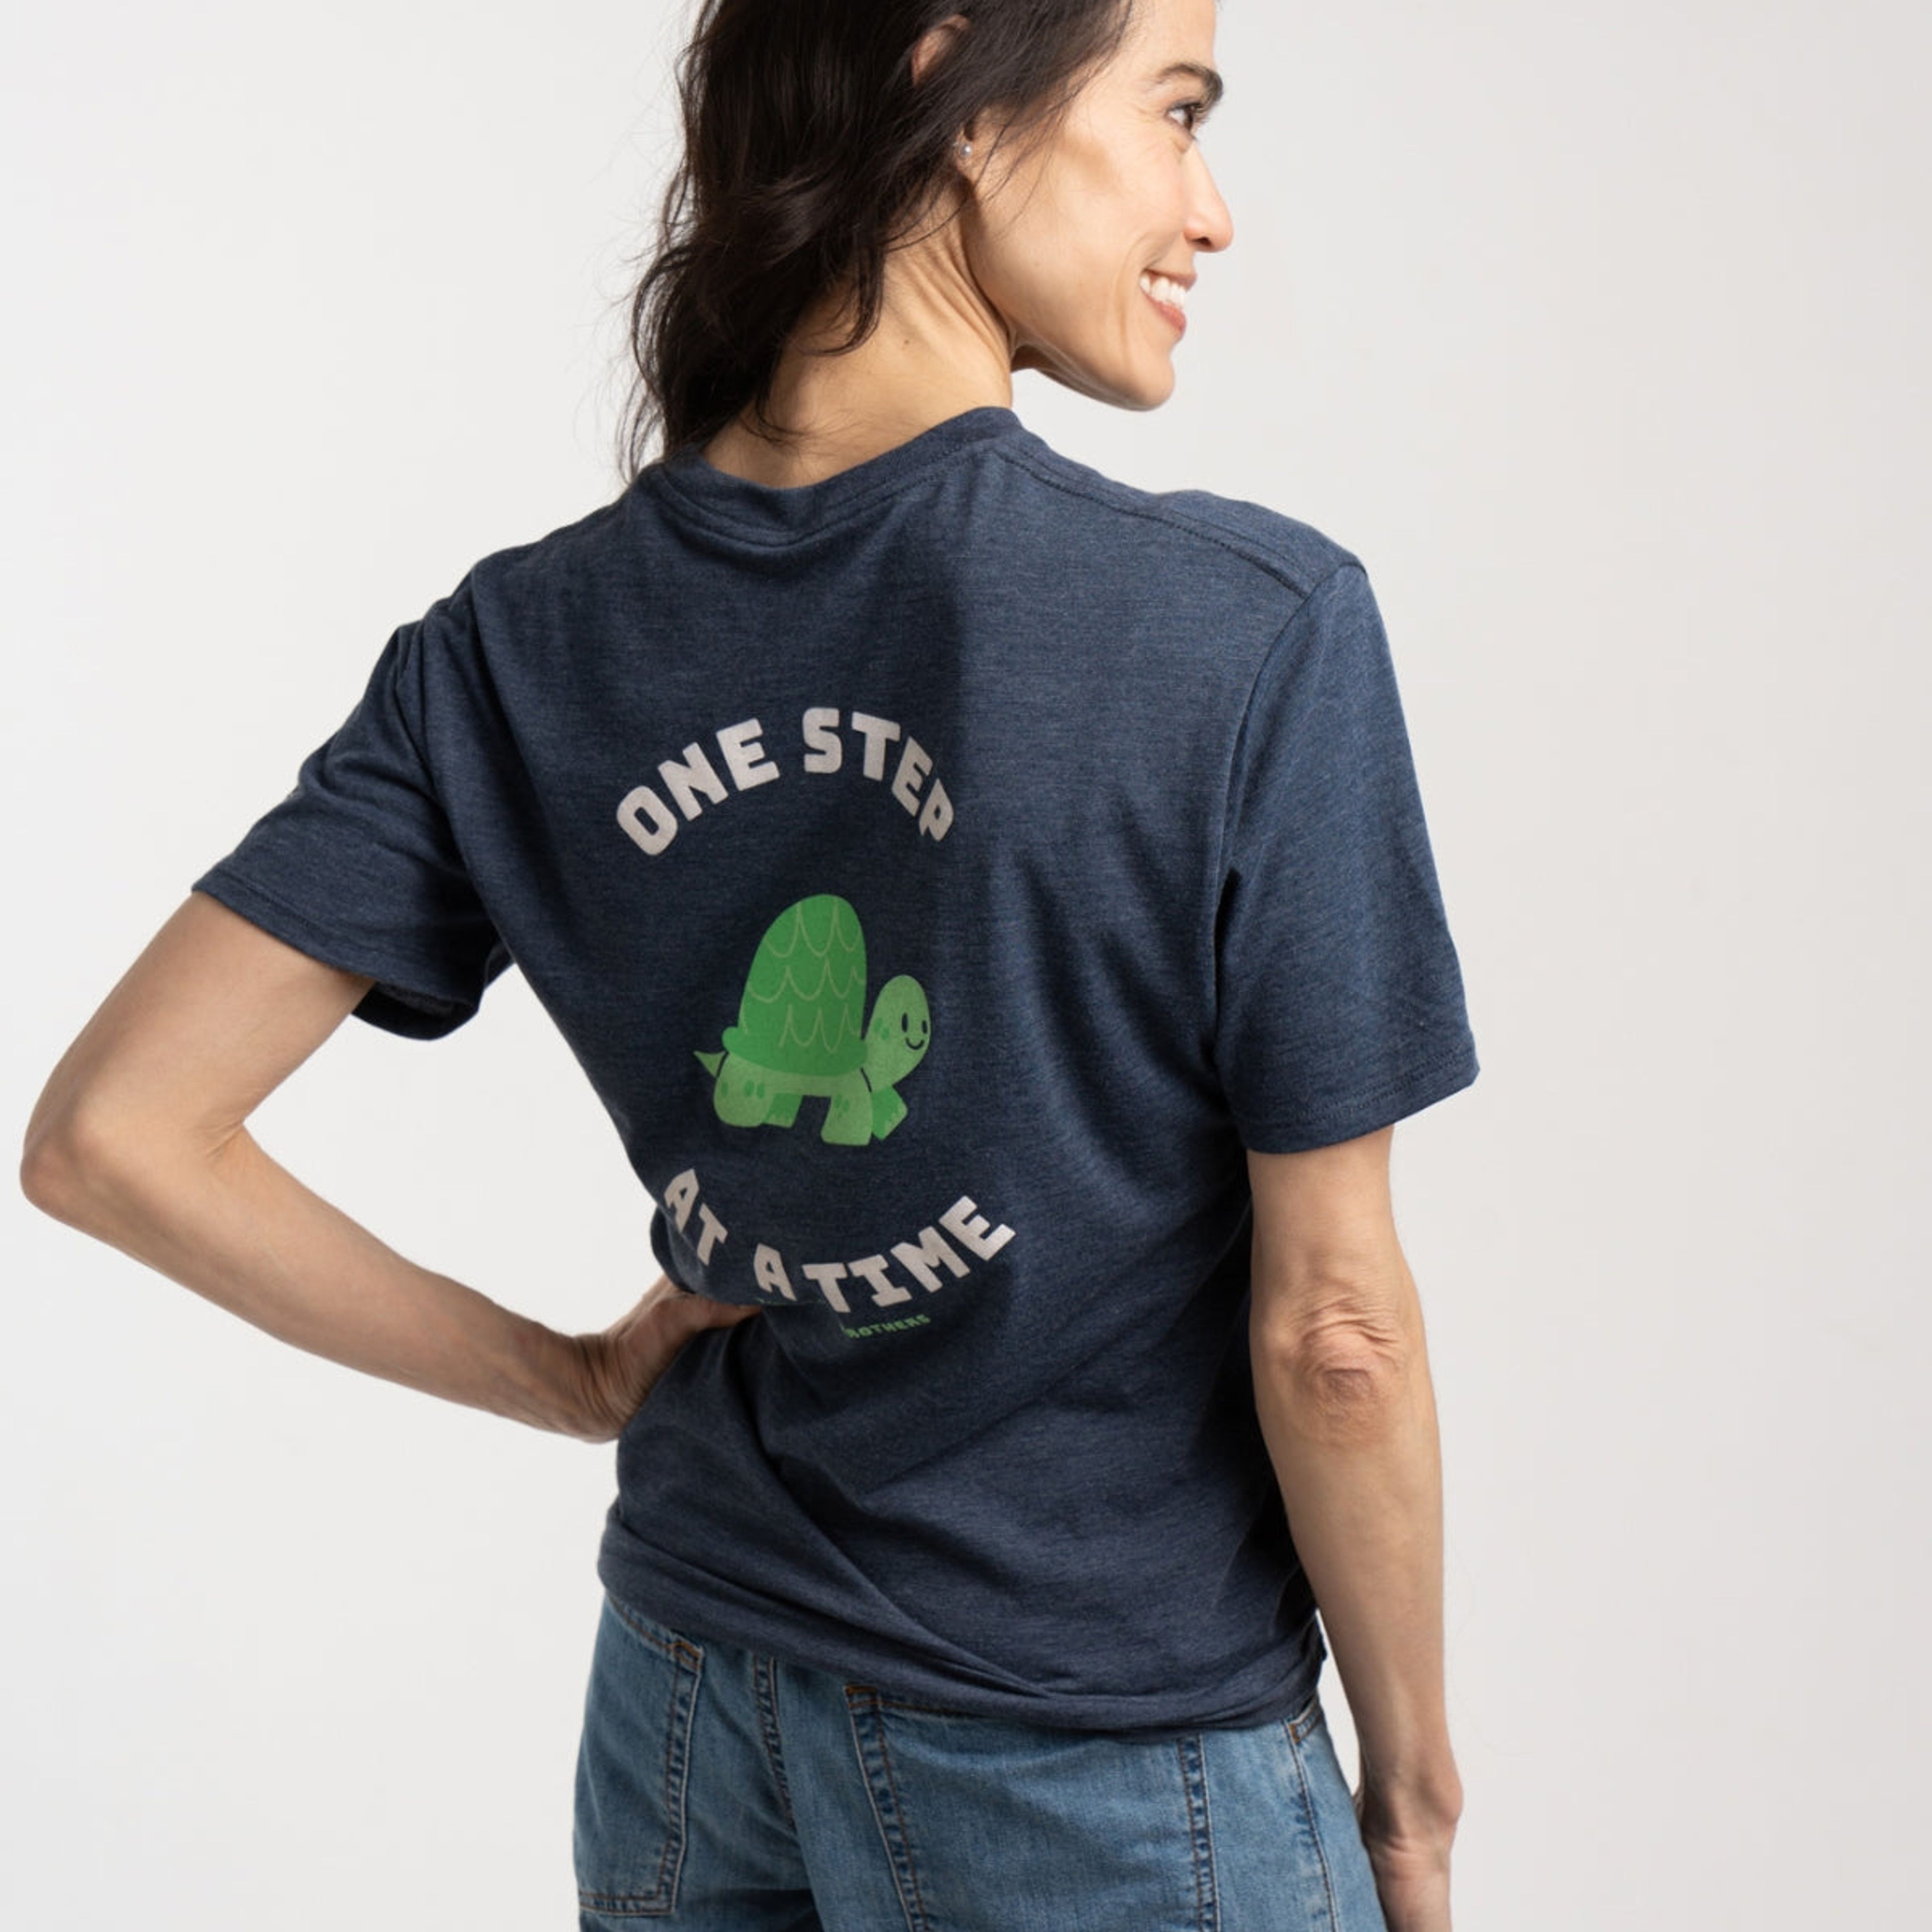 Women's "One Step at a Time" Graphic Crewneck